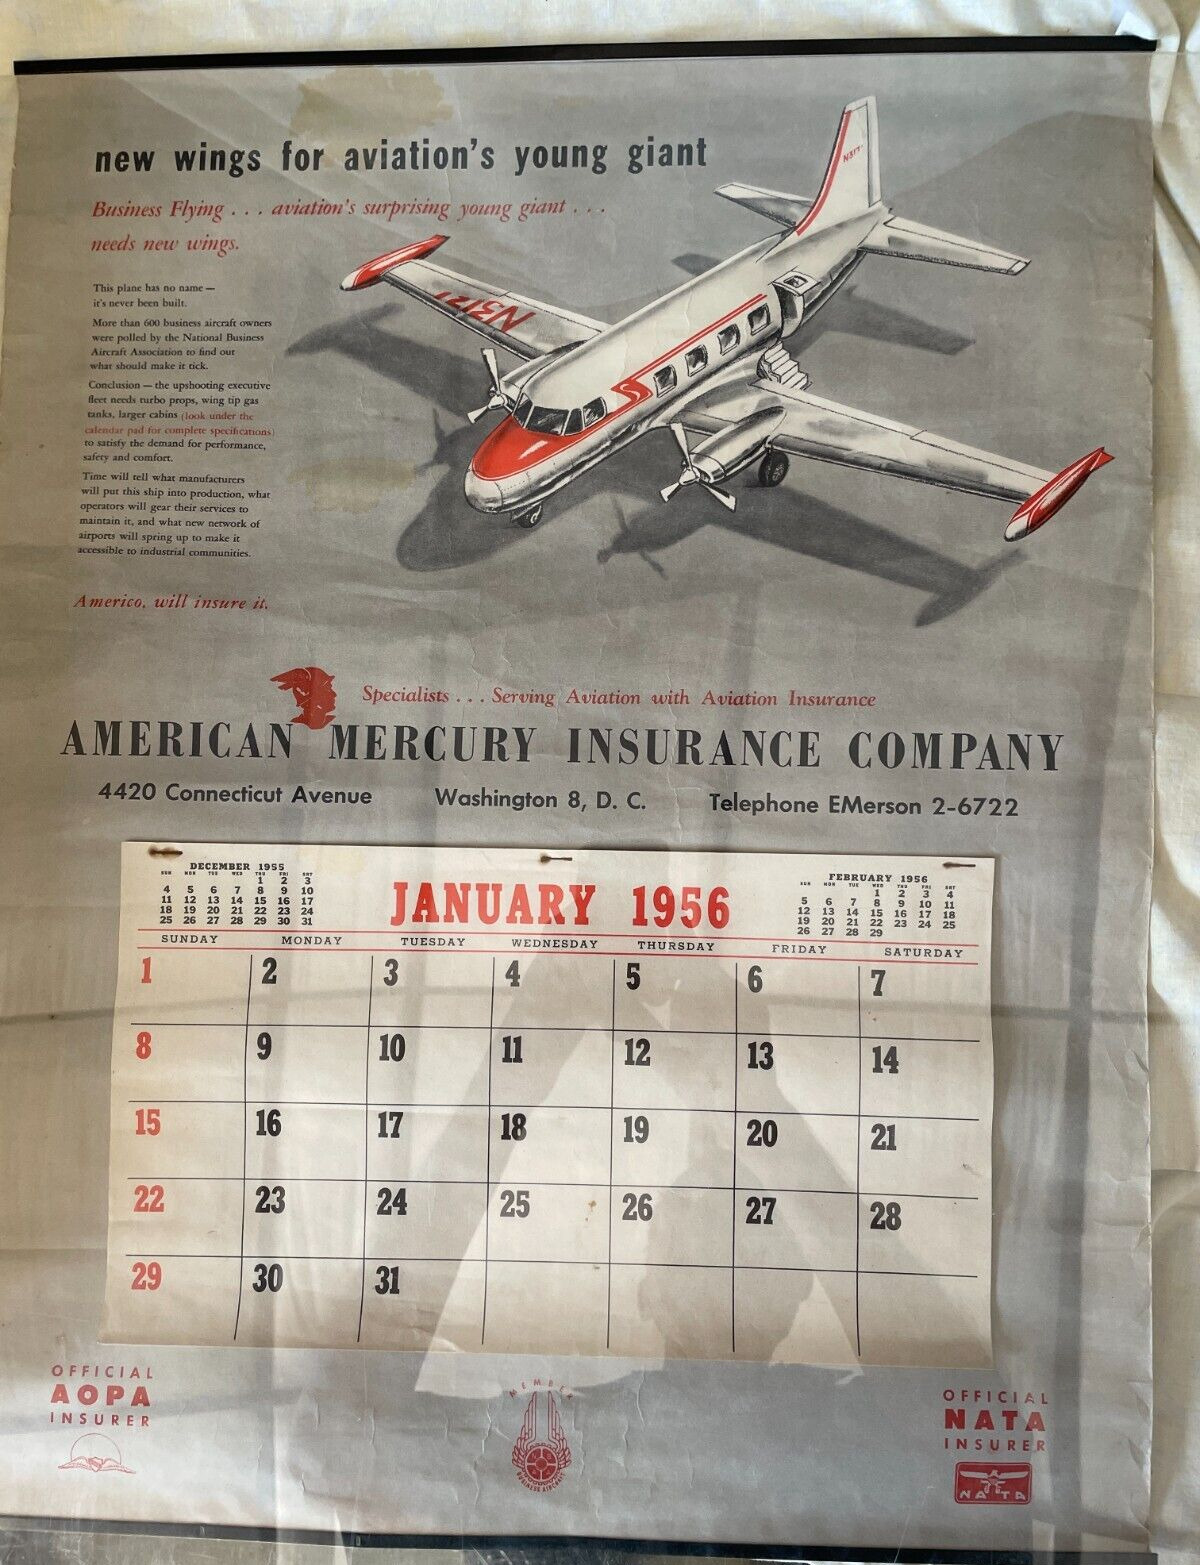 1956 Calendar with a Challenge to Business Aviation that was Met. READ the Copy